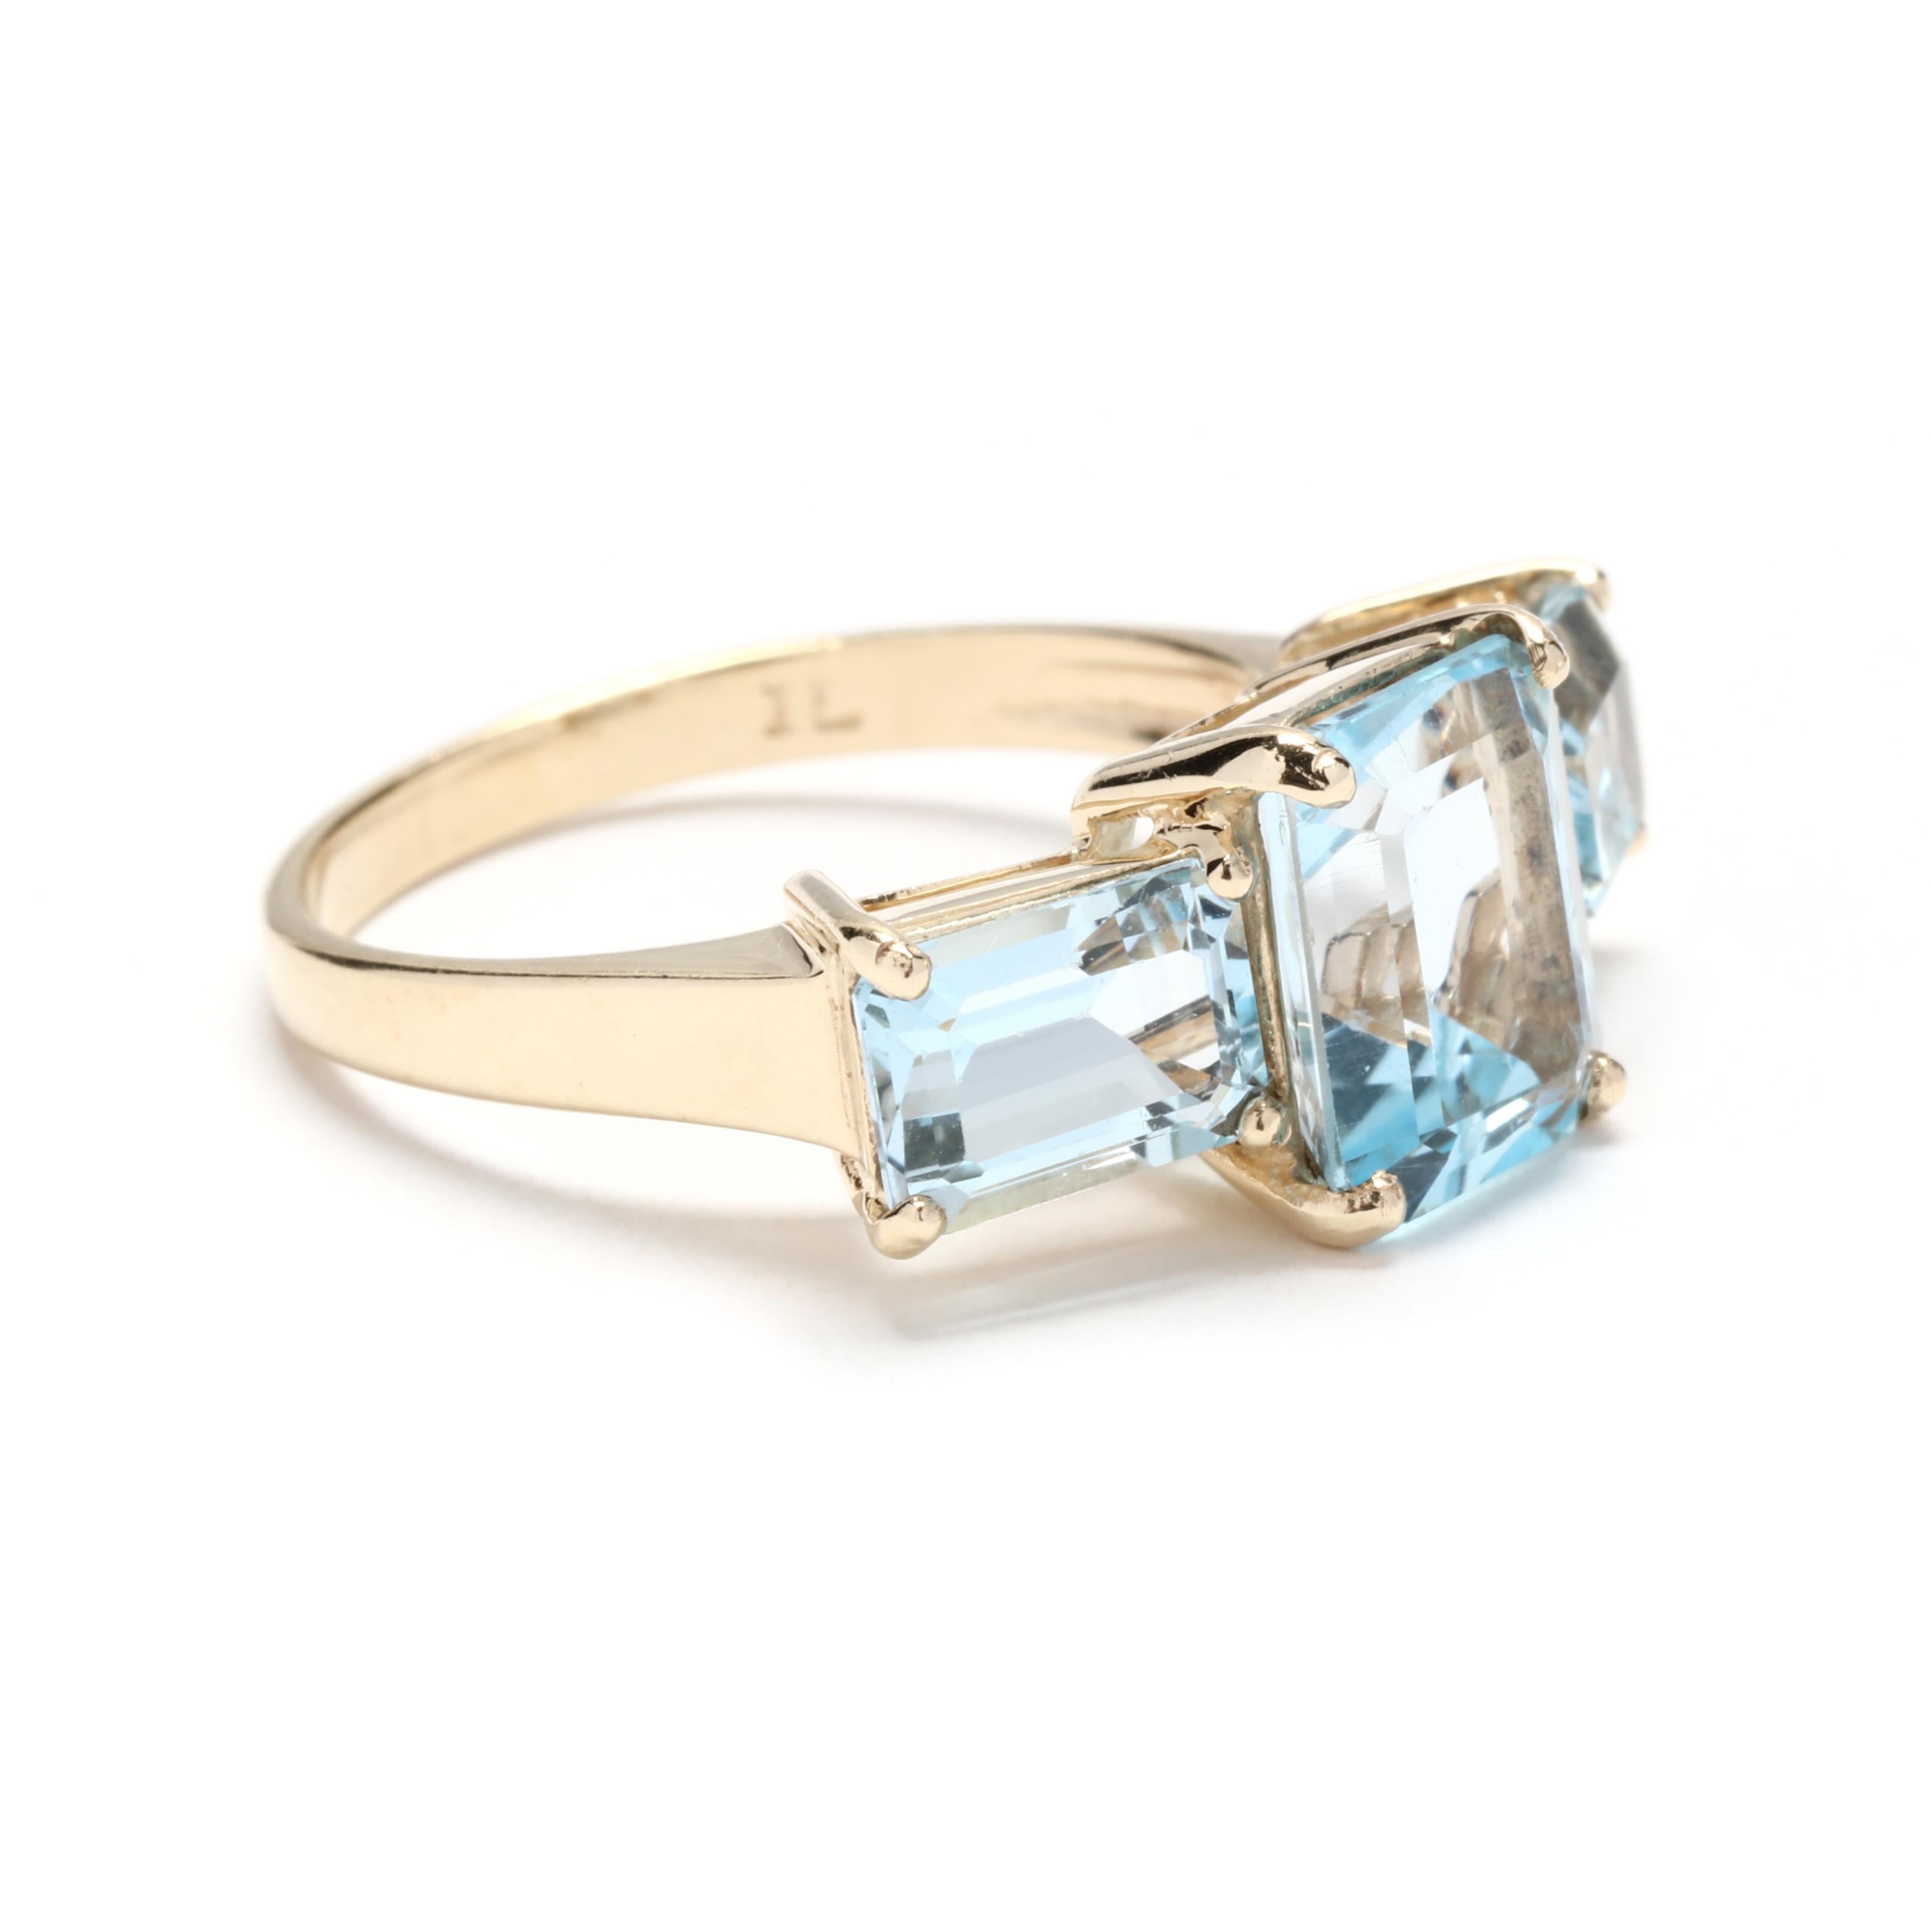 A vintage 10 karat yellow gold emerald cut blue topaz three stone ring. This December birthstone ring features a vertical prong set, emerald cut blue topaz center stone with horizontal emerald blue topaz stones on either side weighing approximately